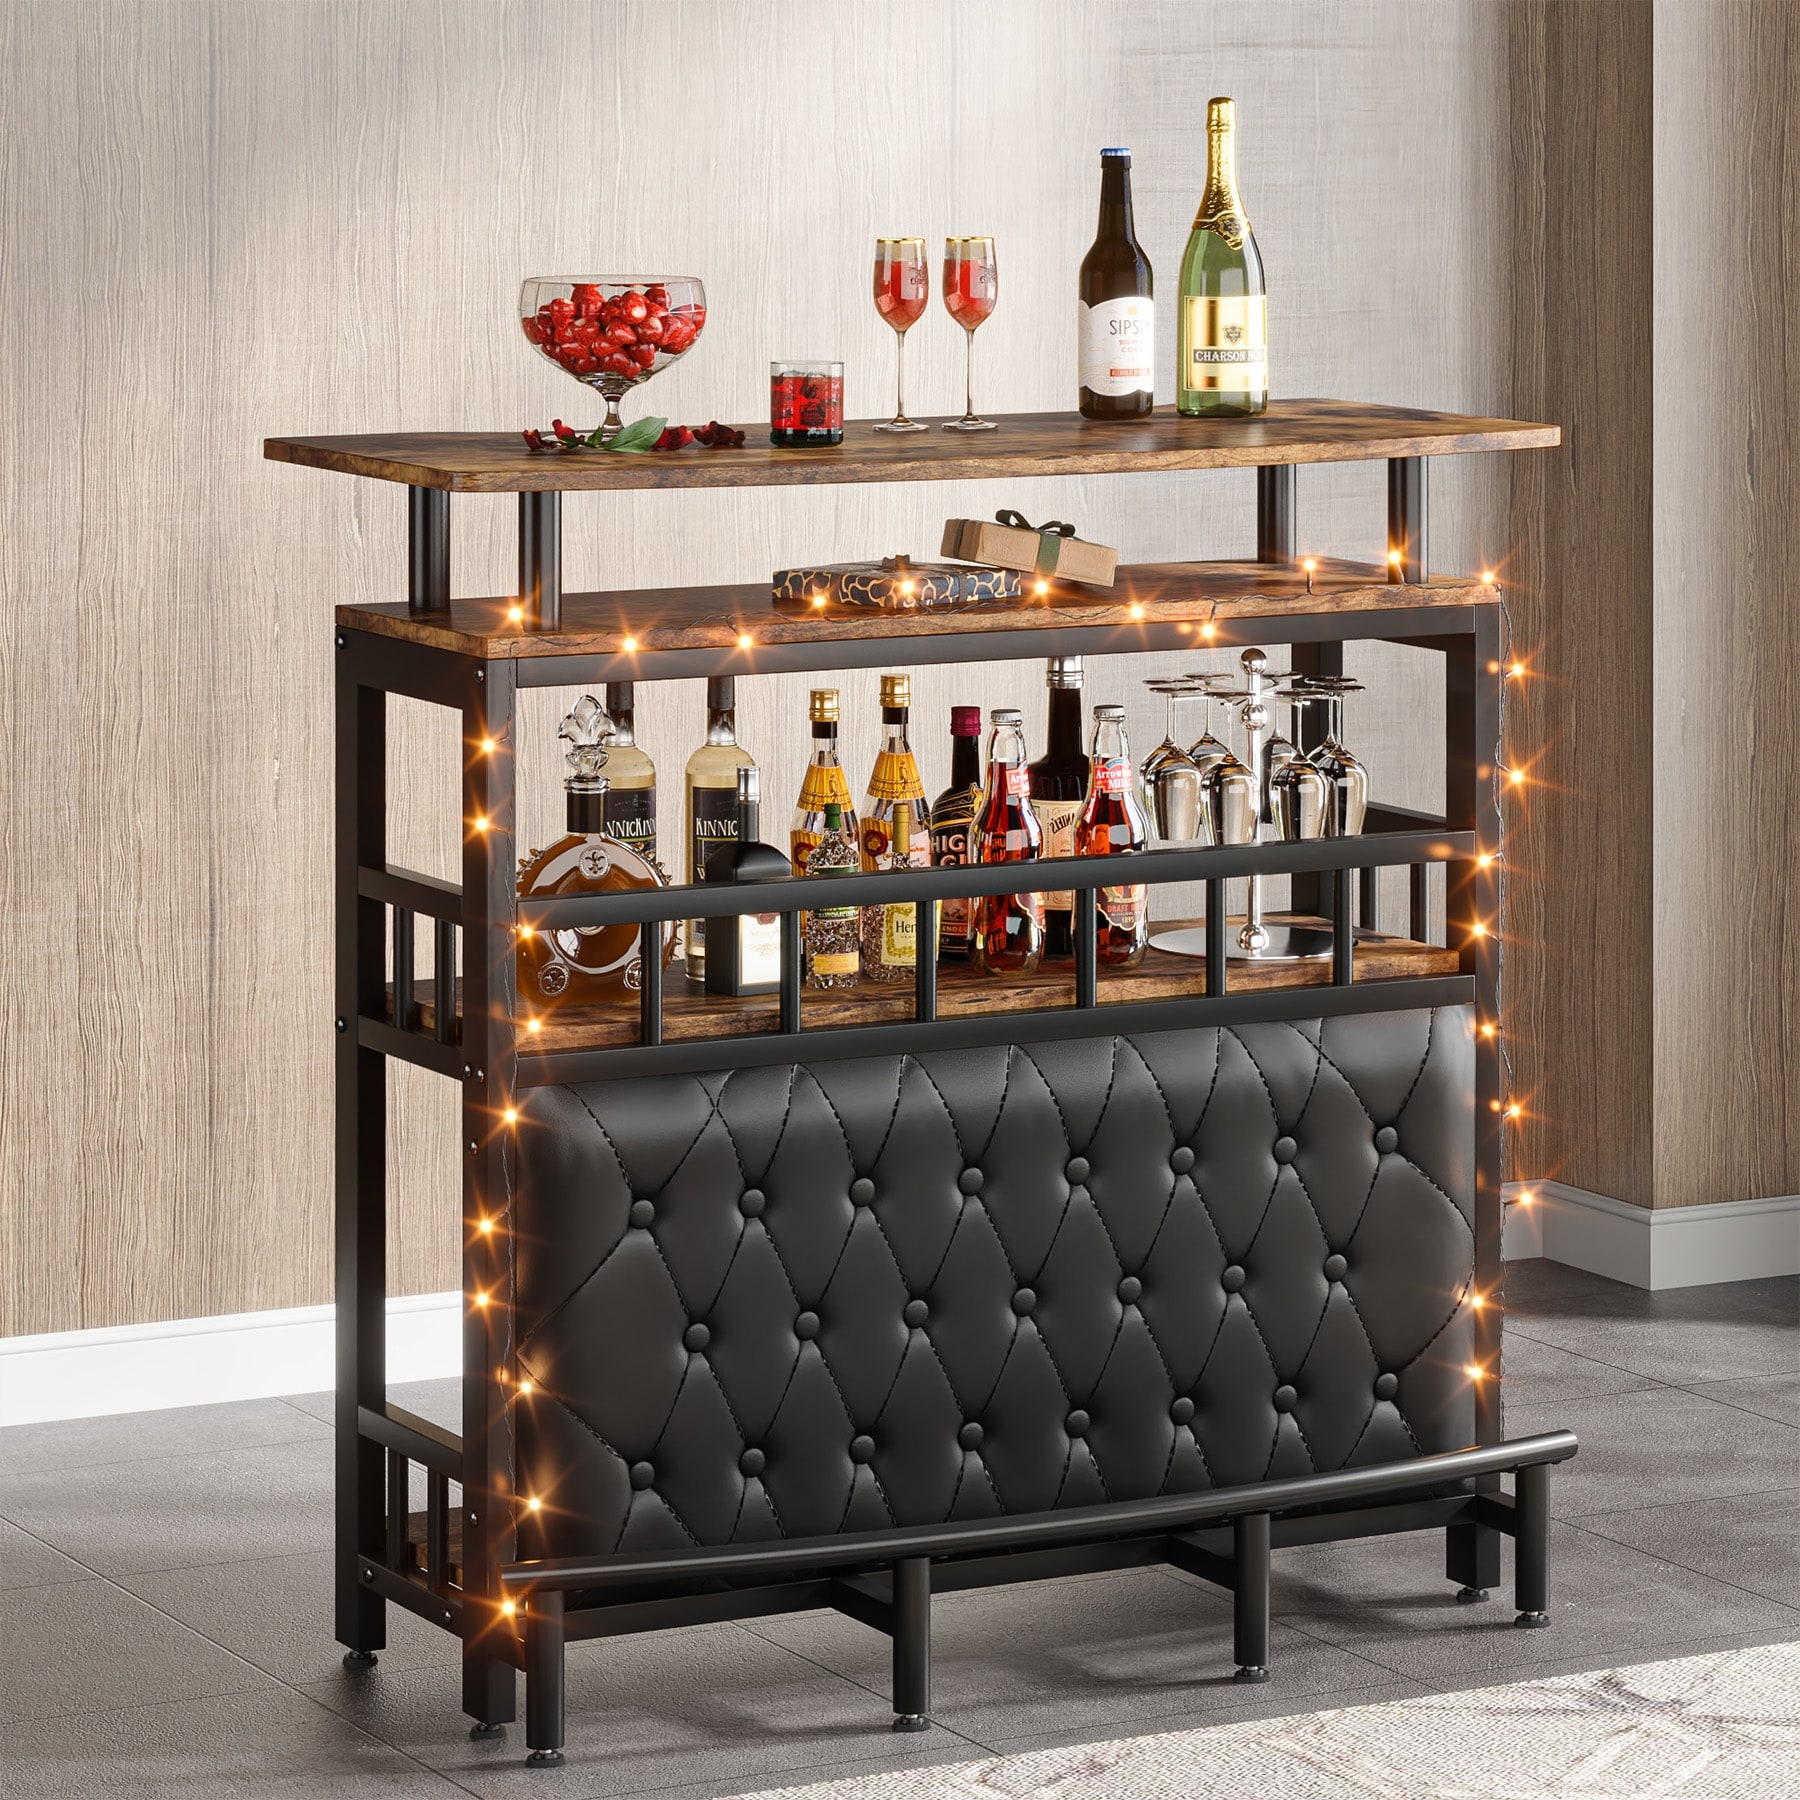 https://ak1.ostkcdn.com/images/products/is/images/direct/3eb1ade71c30c8f4de719f6f18711fd3272e1430/Home-Bar-Unit%2C4-Tier-Liquor-Bar-Table-with-Storage-and-Footrest%2CBar-Organizer-Table-for-Home-Bar.jpg